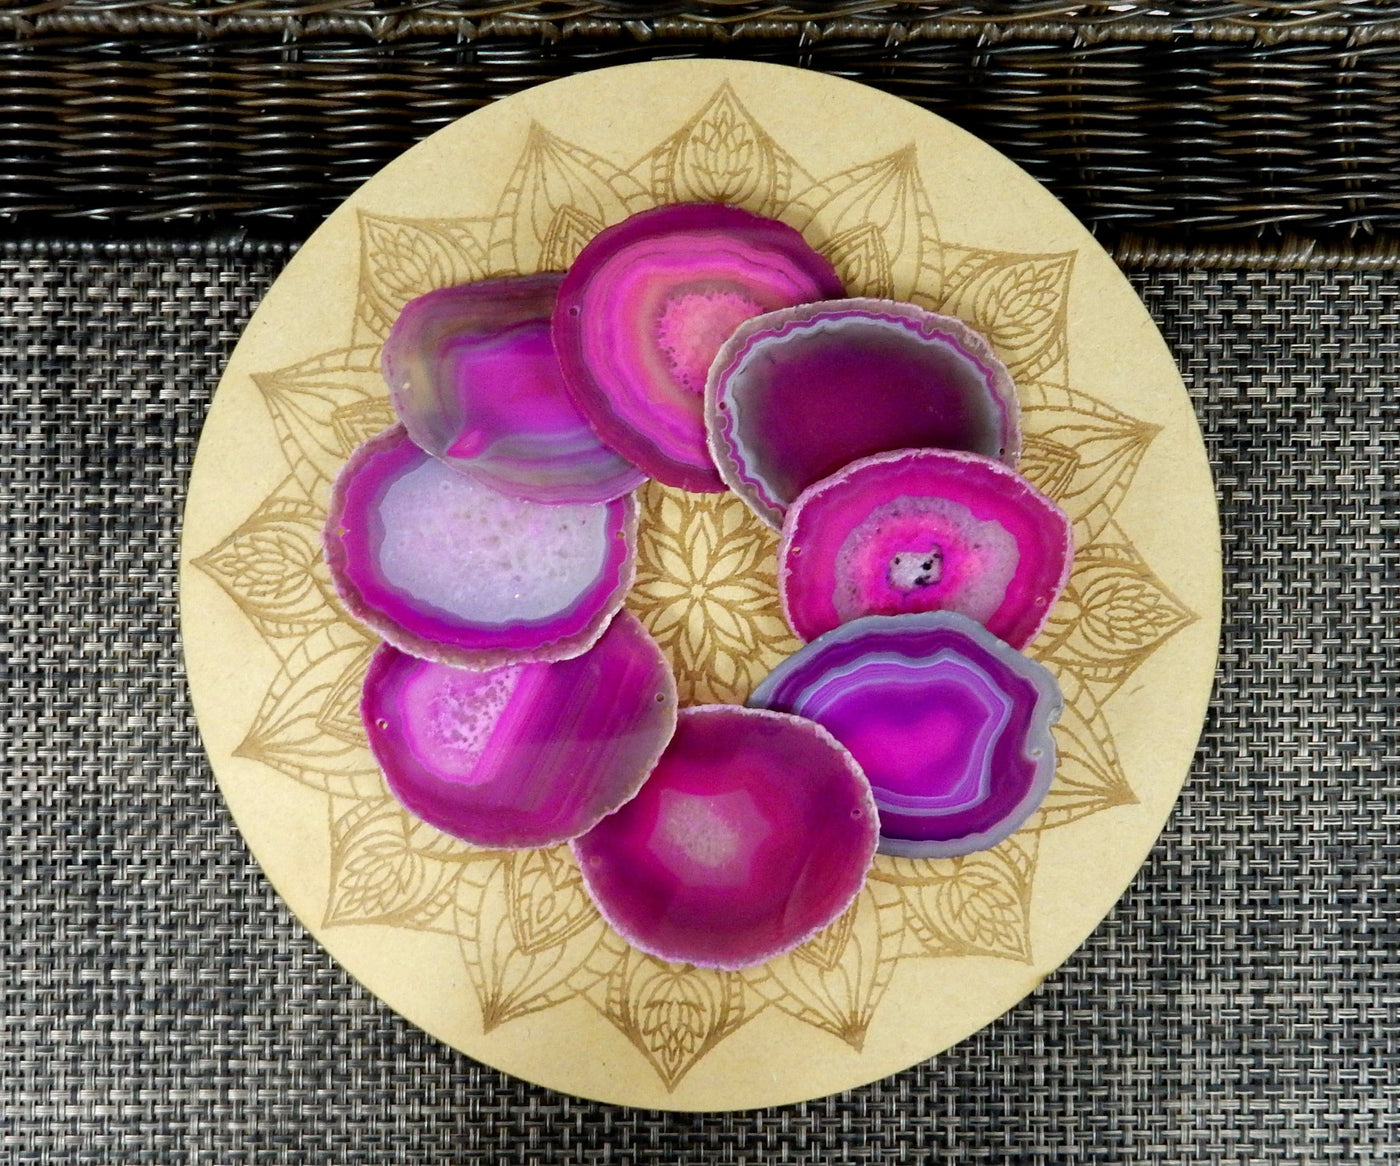 Picture of multiple pink agate slices, being displayed on a wooden grid